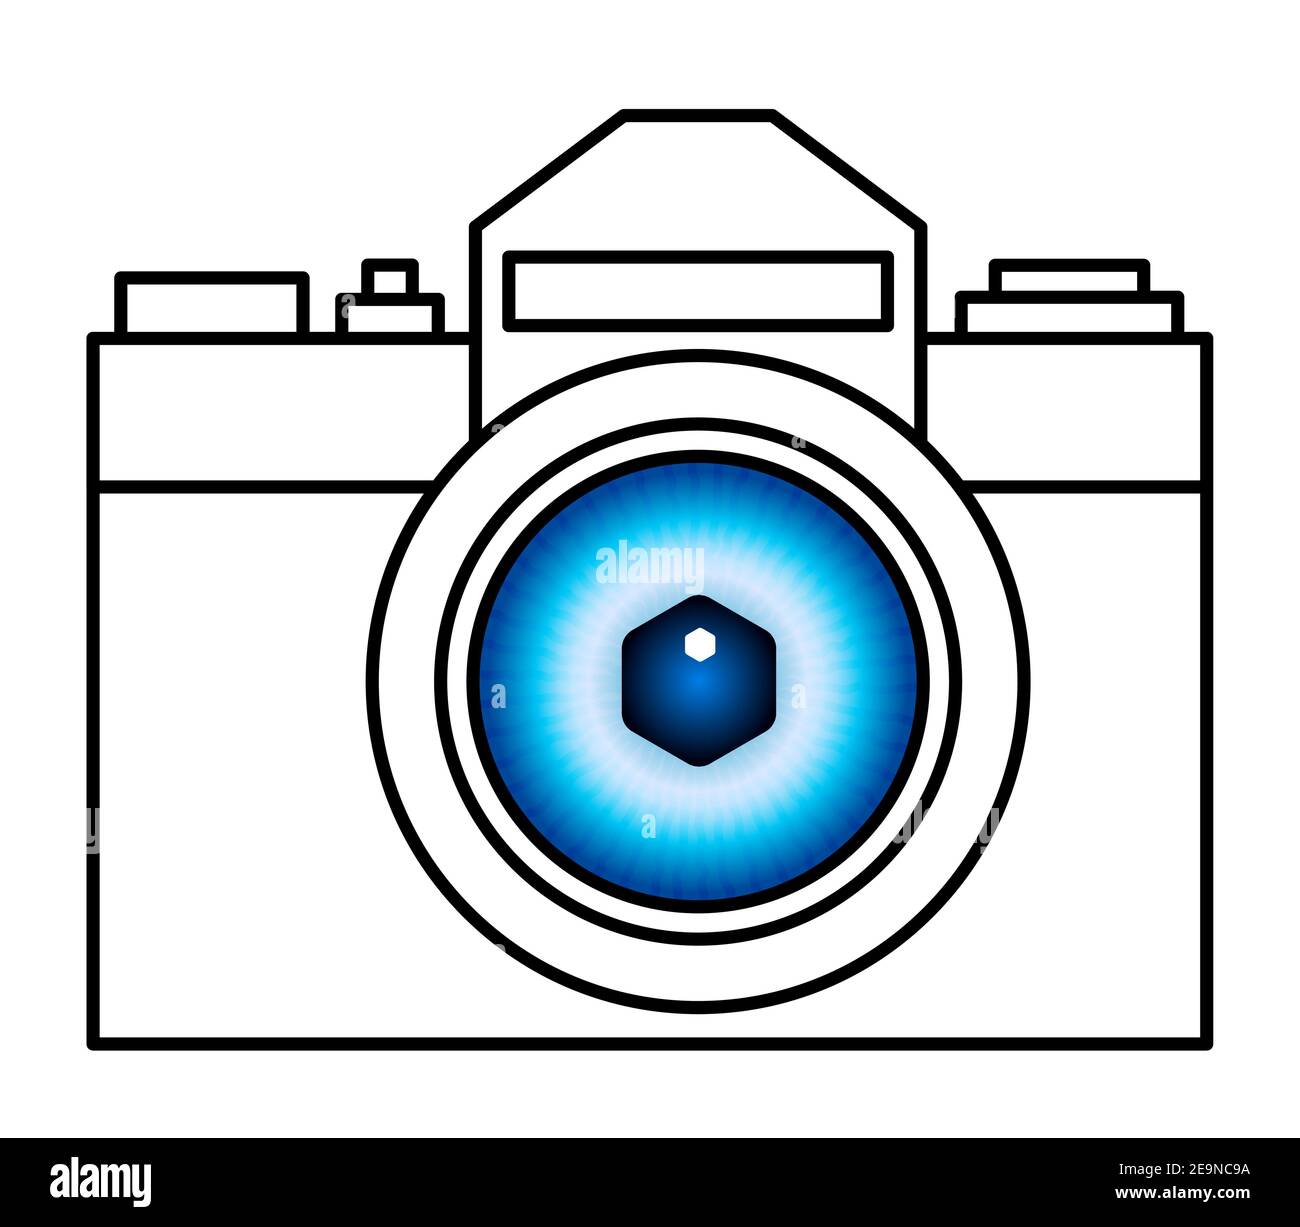 Illustration of the concept photographic camera with eye lens Stock Vector